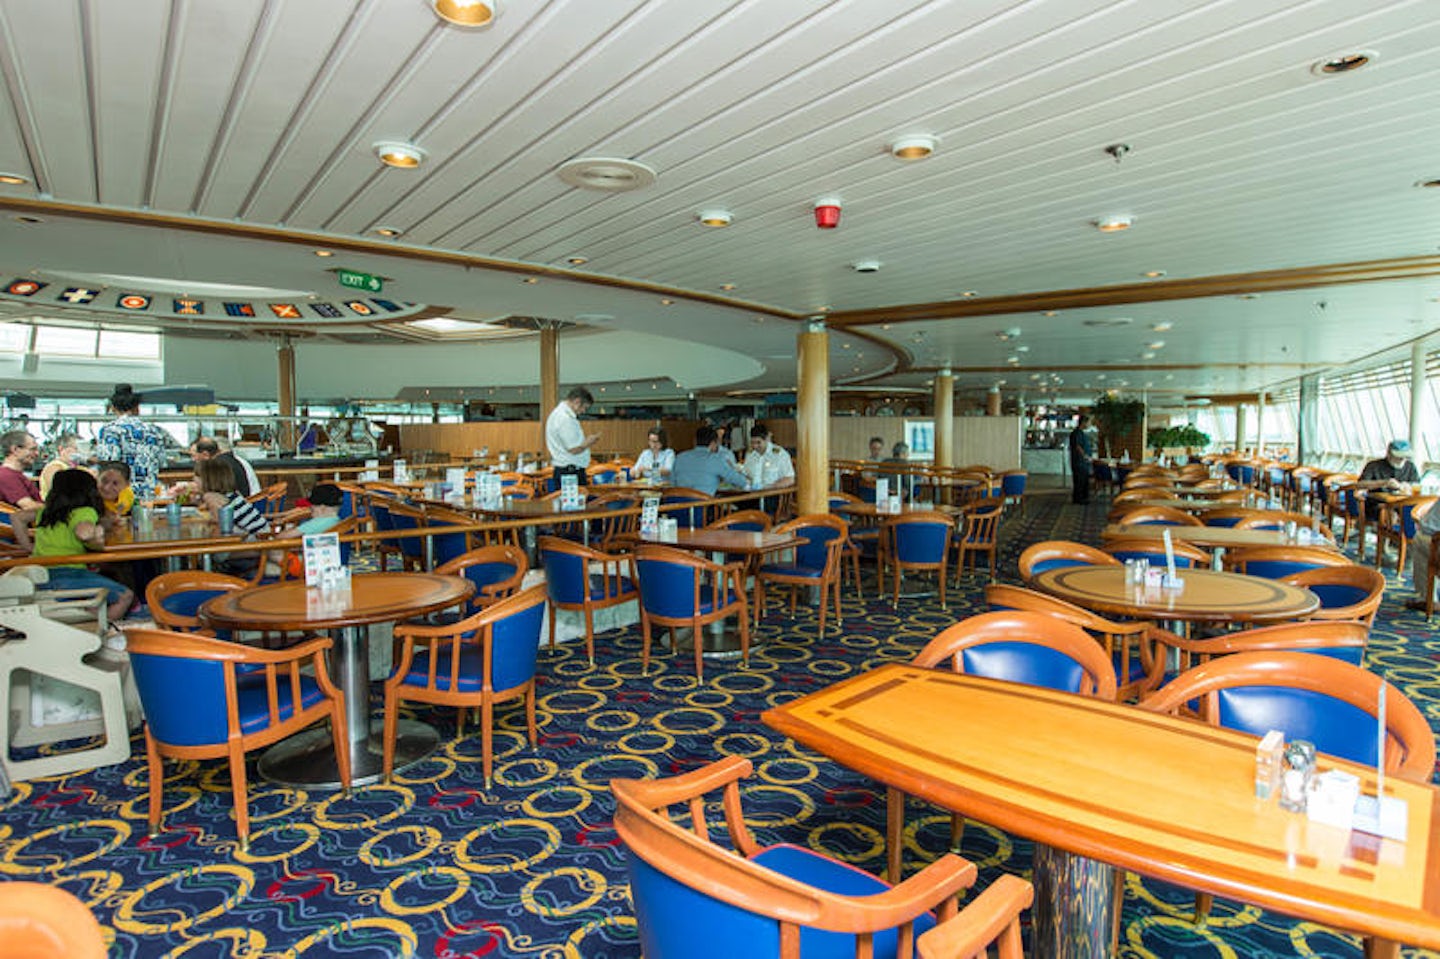 Windjammer Cafe on Vision of the Seas